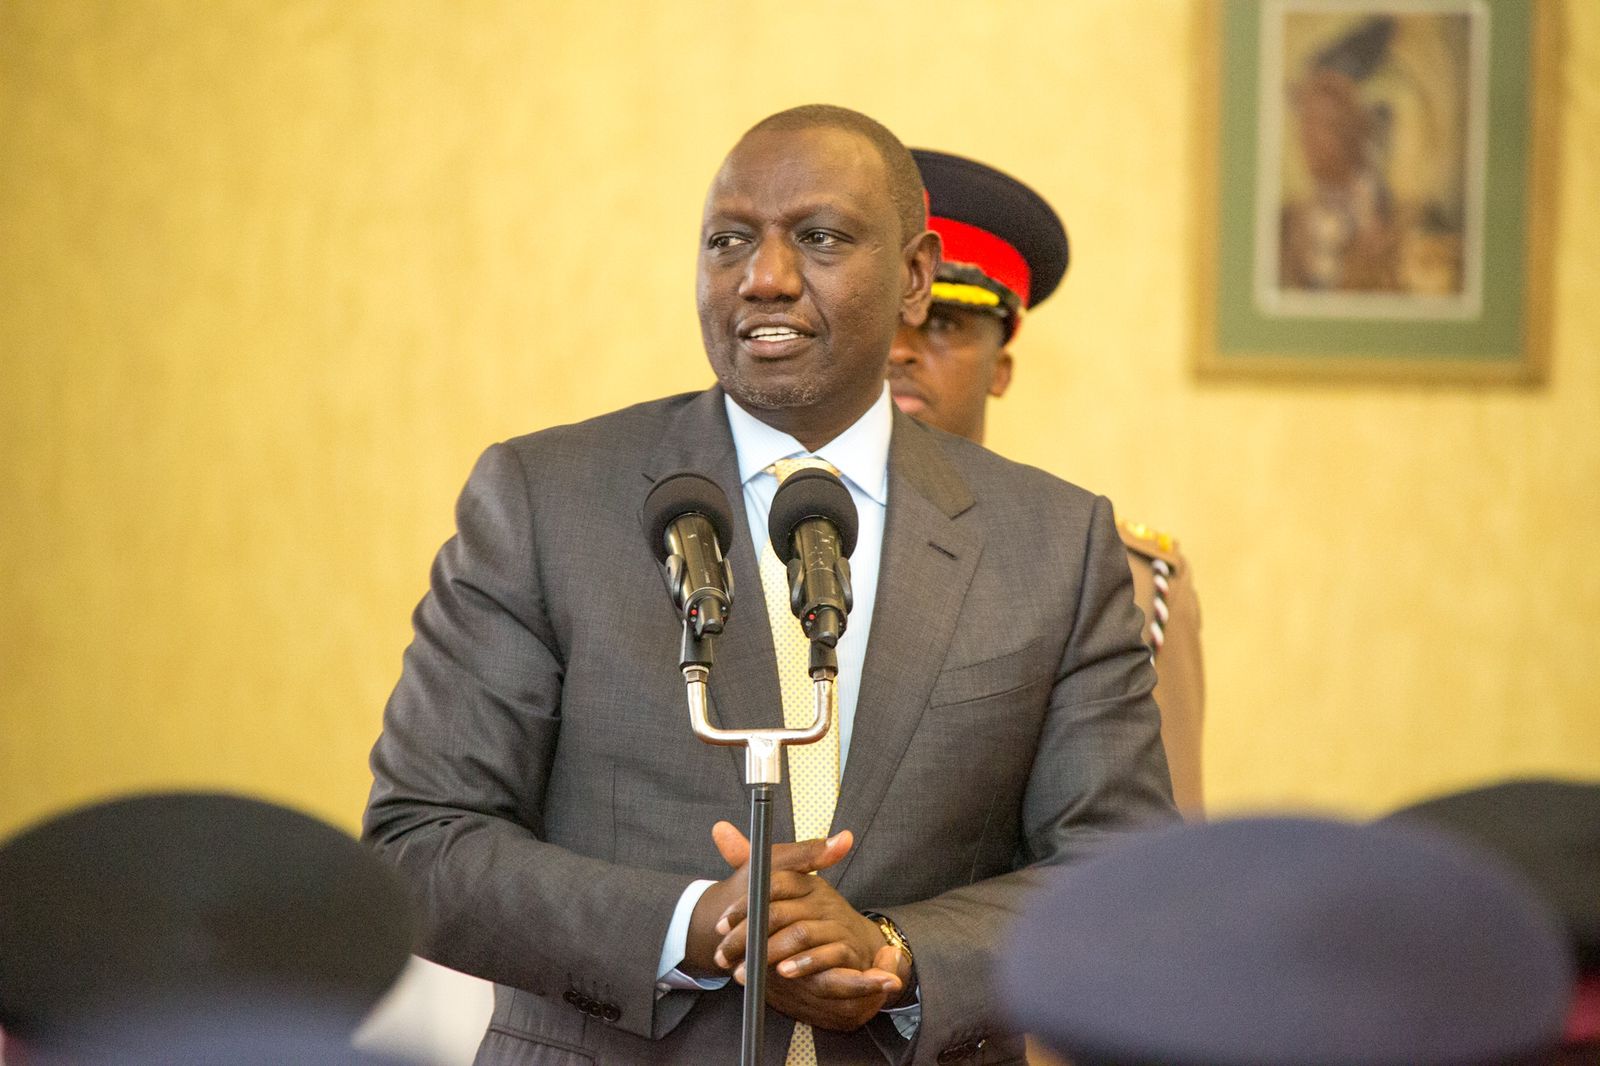 President William Ruto at State House.